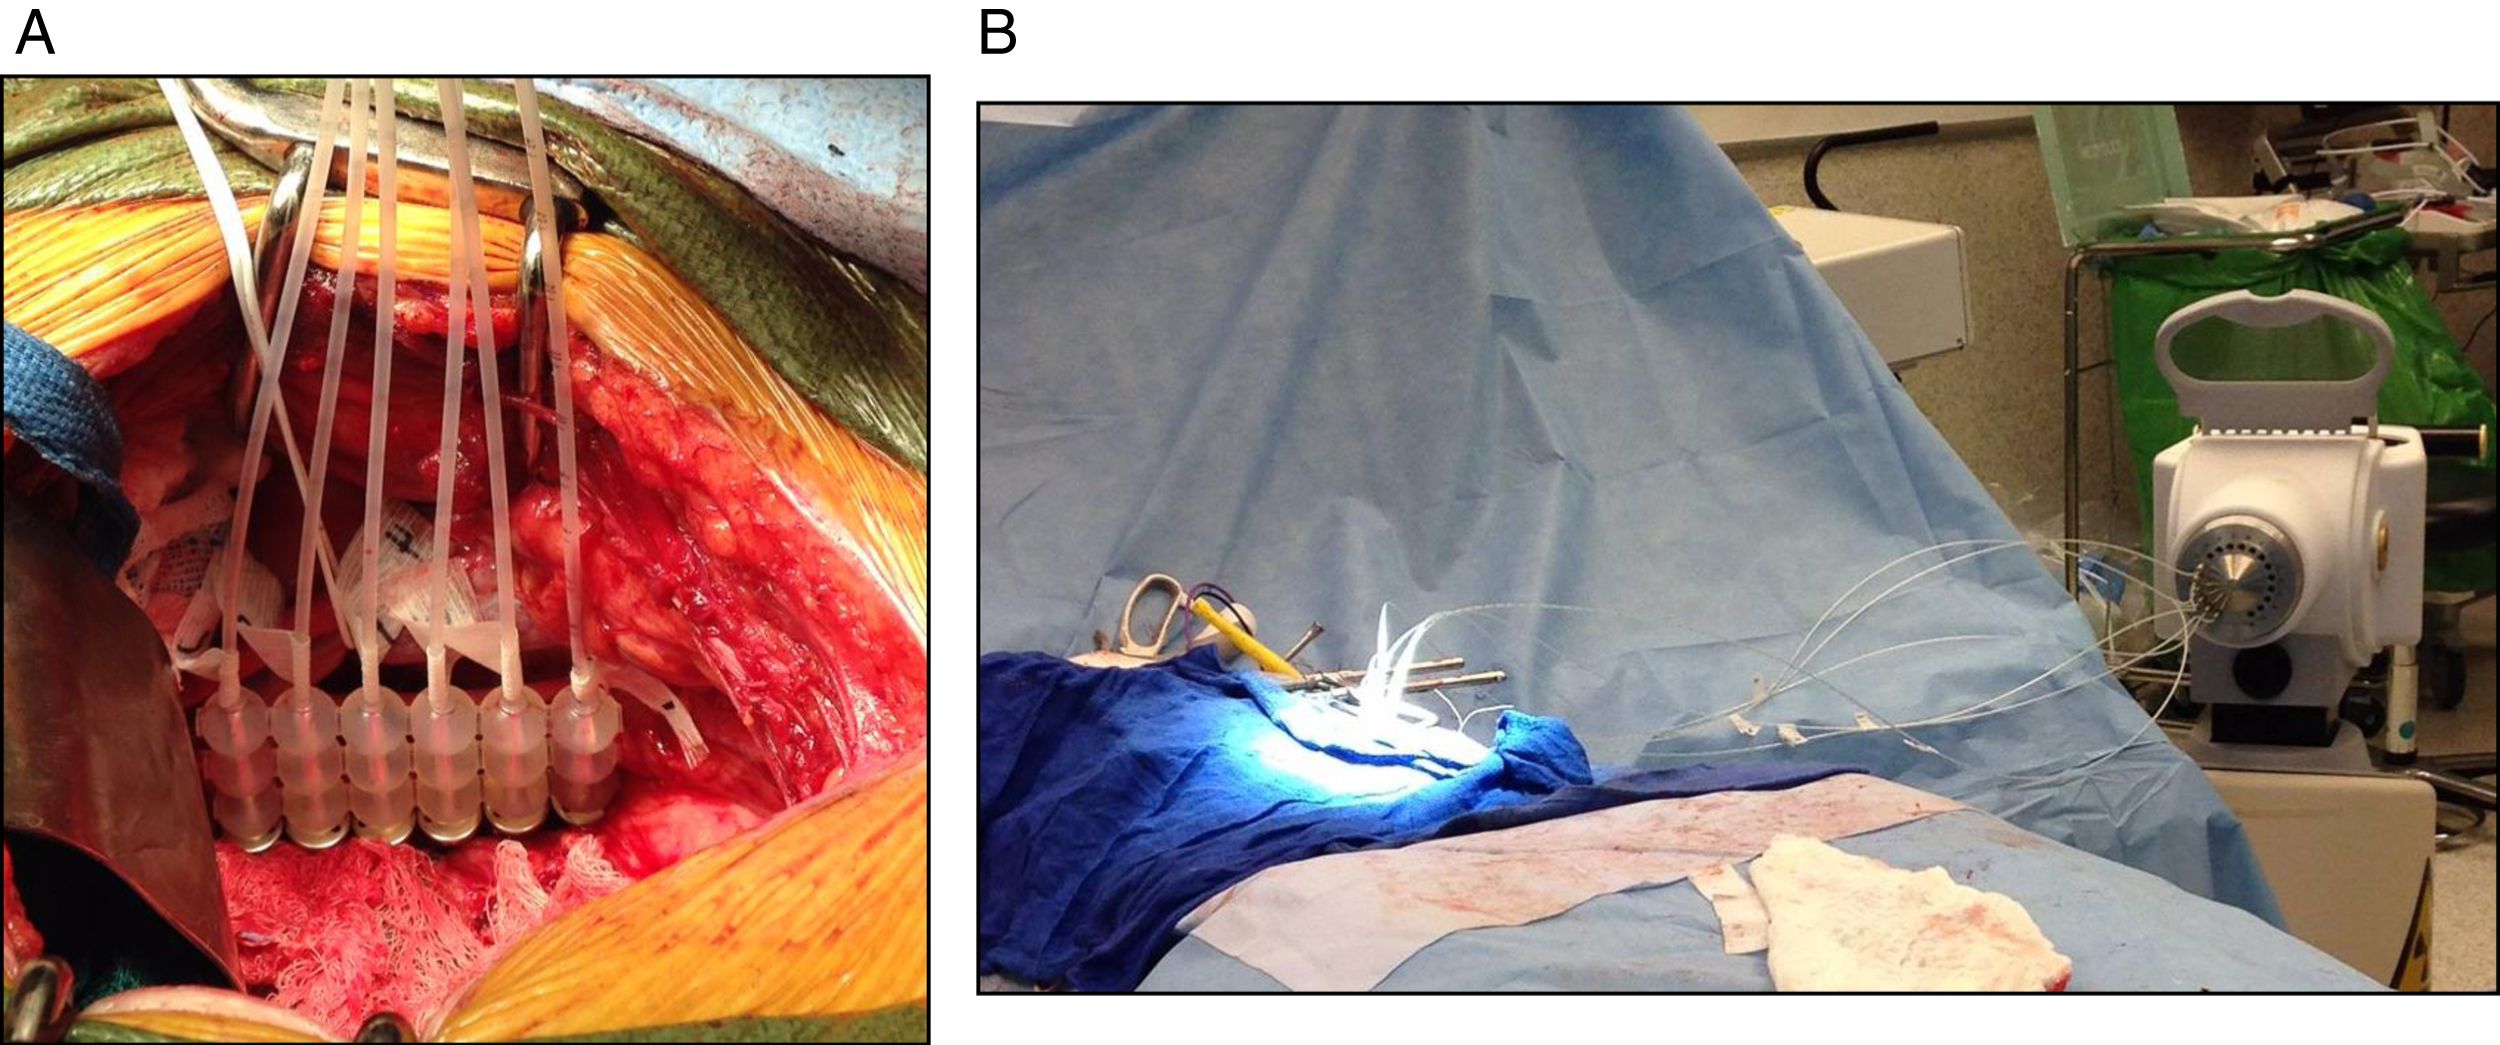 Following resection, (A) the area of interest is isolated from surrounding bowel and ureter, and (B,C) a Freiberg flap is placed with flexible beads and 6Fr catheters connecting to the afterloader.